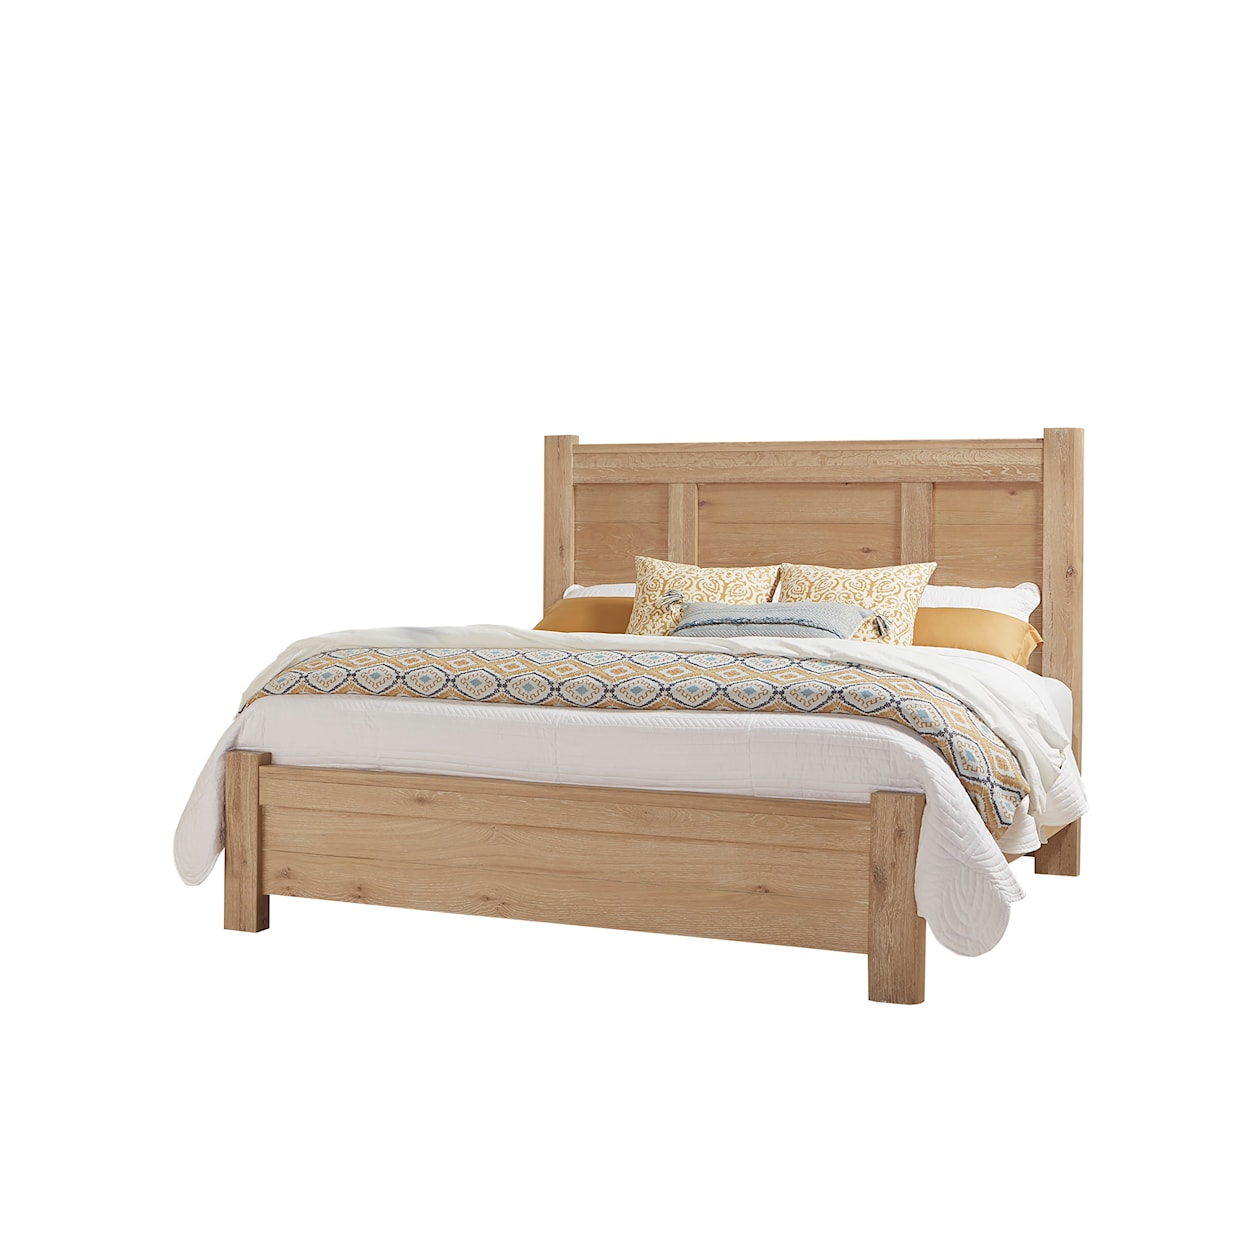 Vaughan Bassett Crafted Oak - Bleached White King Poster Bed